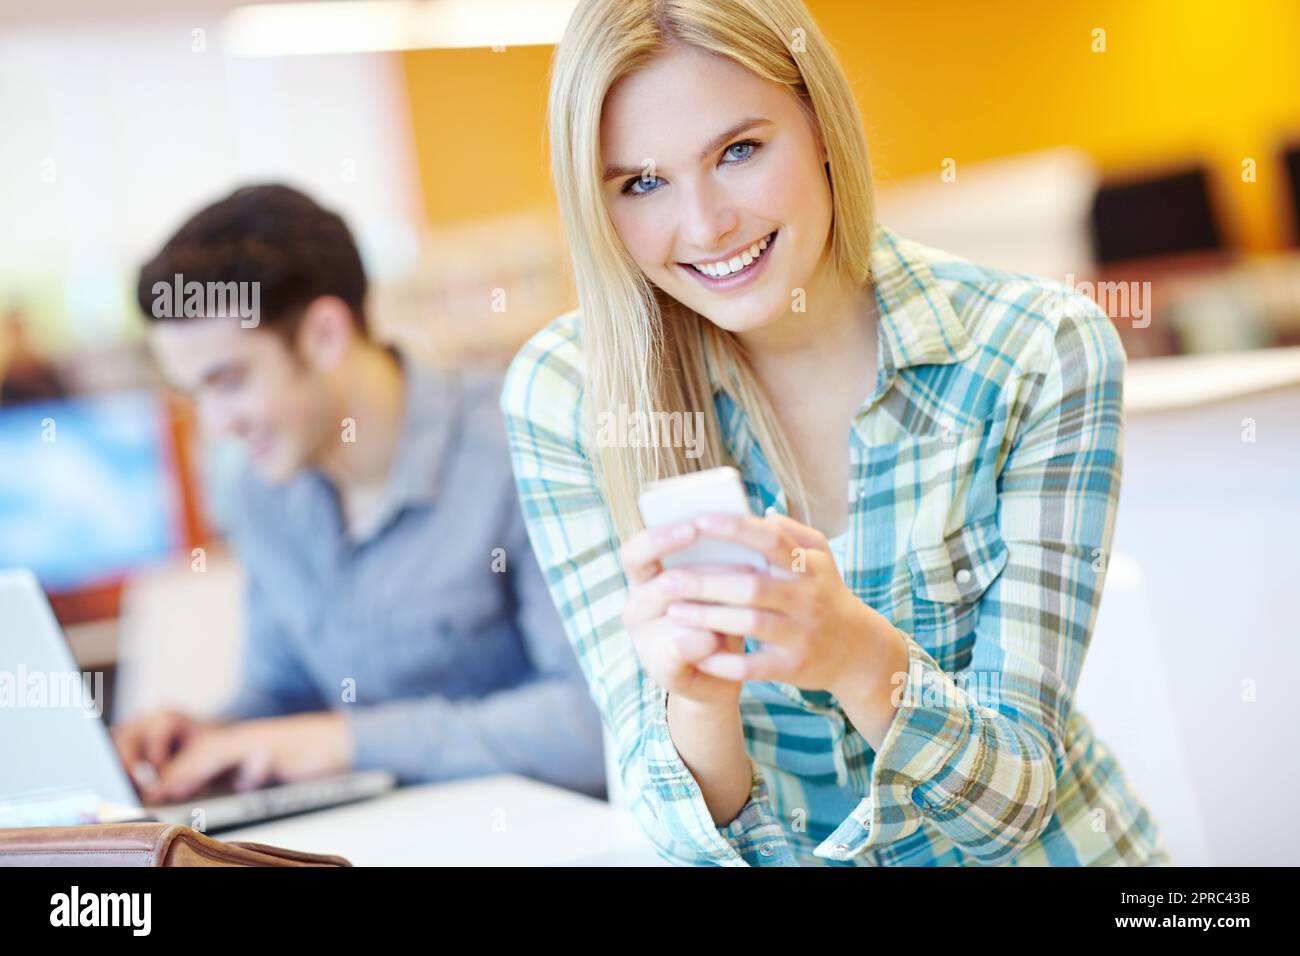 She just heard some juicy gossip. Attractive female student reading a text with her study buddy in the background. Stock Photo